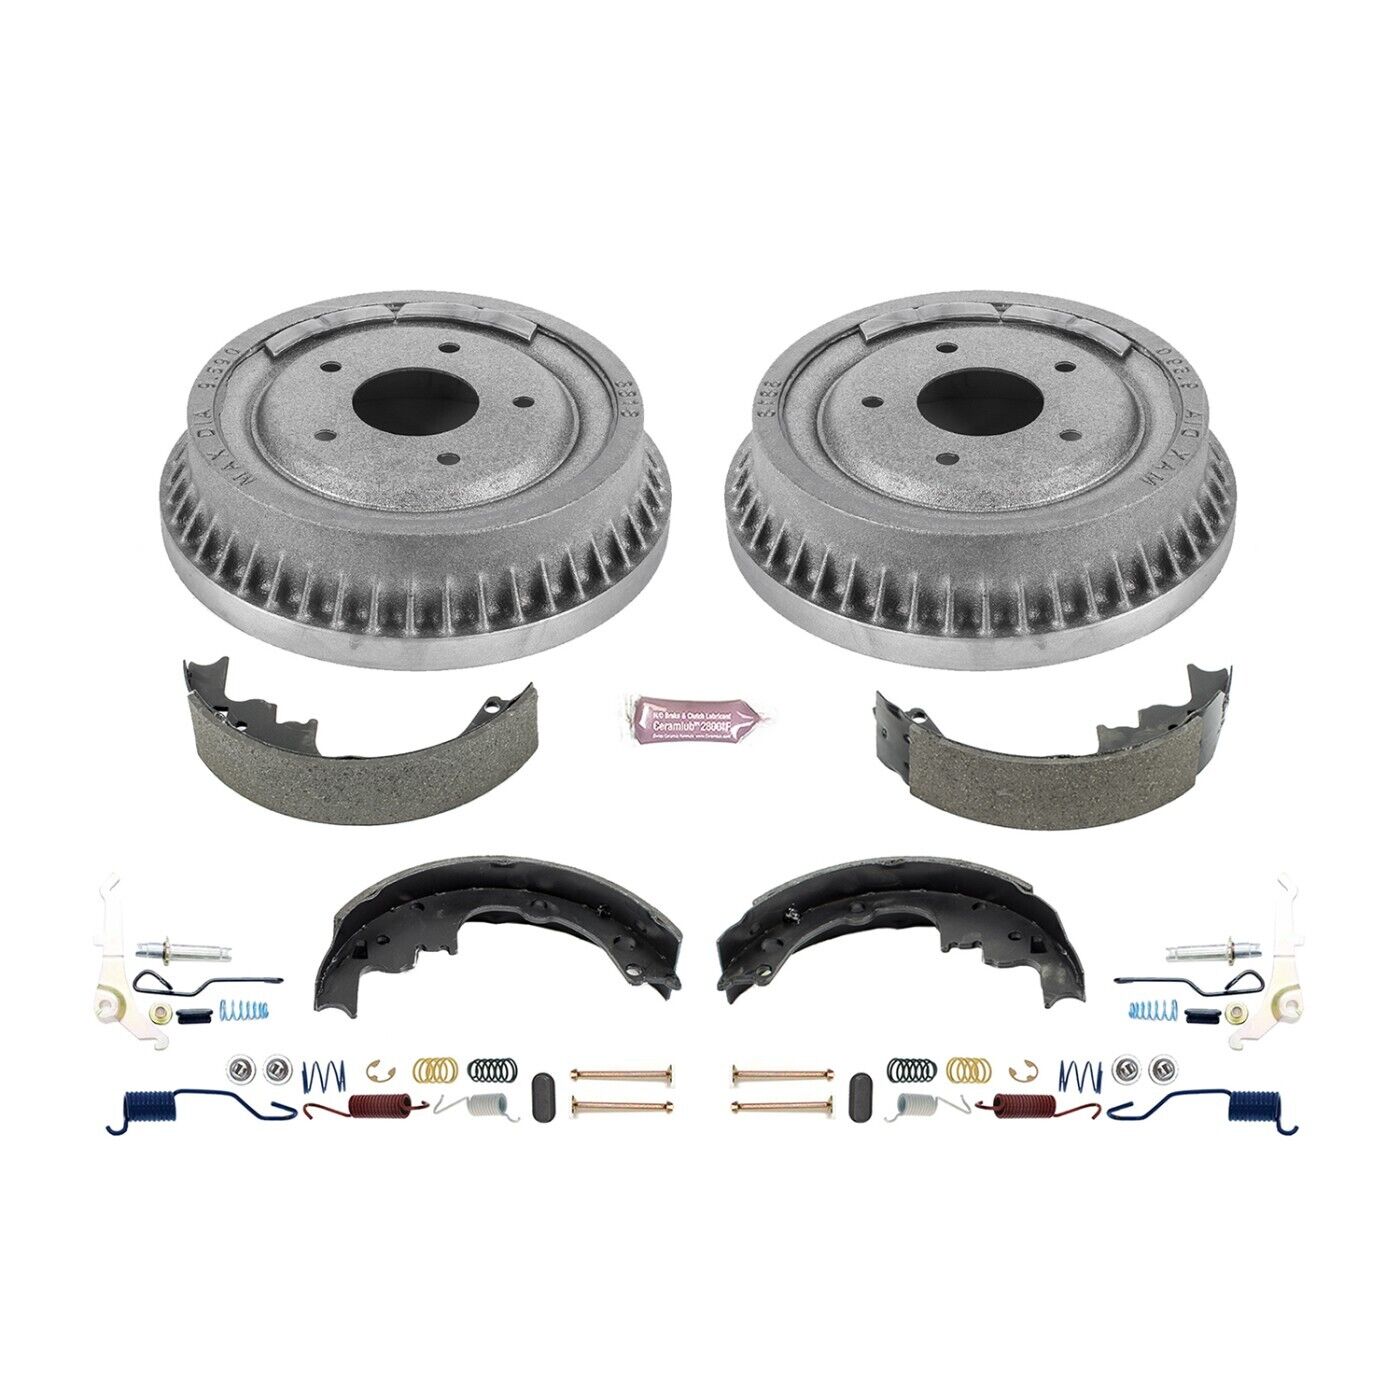 Powerstop KOE15291DK Brake Drum and Shoe Kits 2-Wheel Set Rear for Chevy Olds